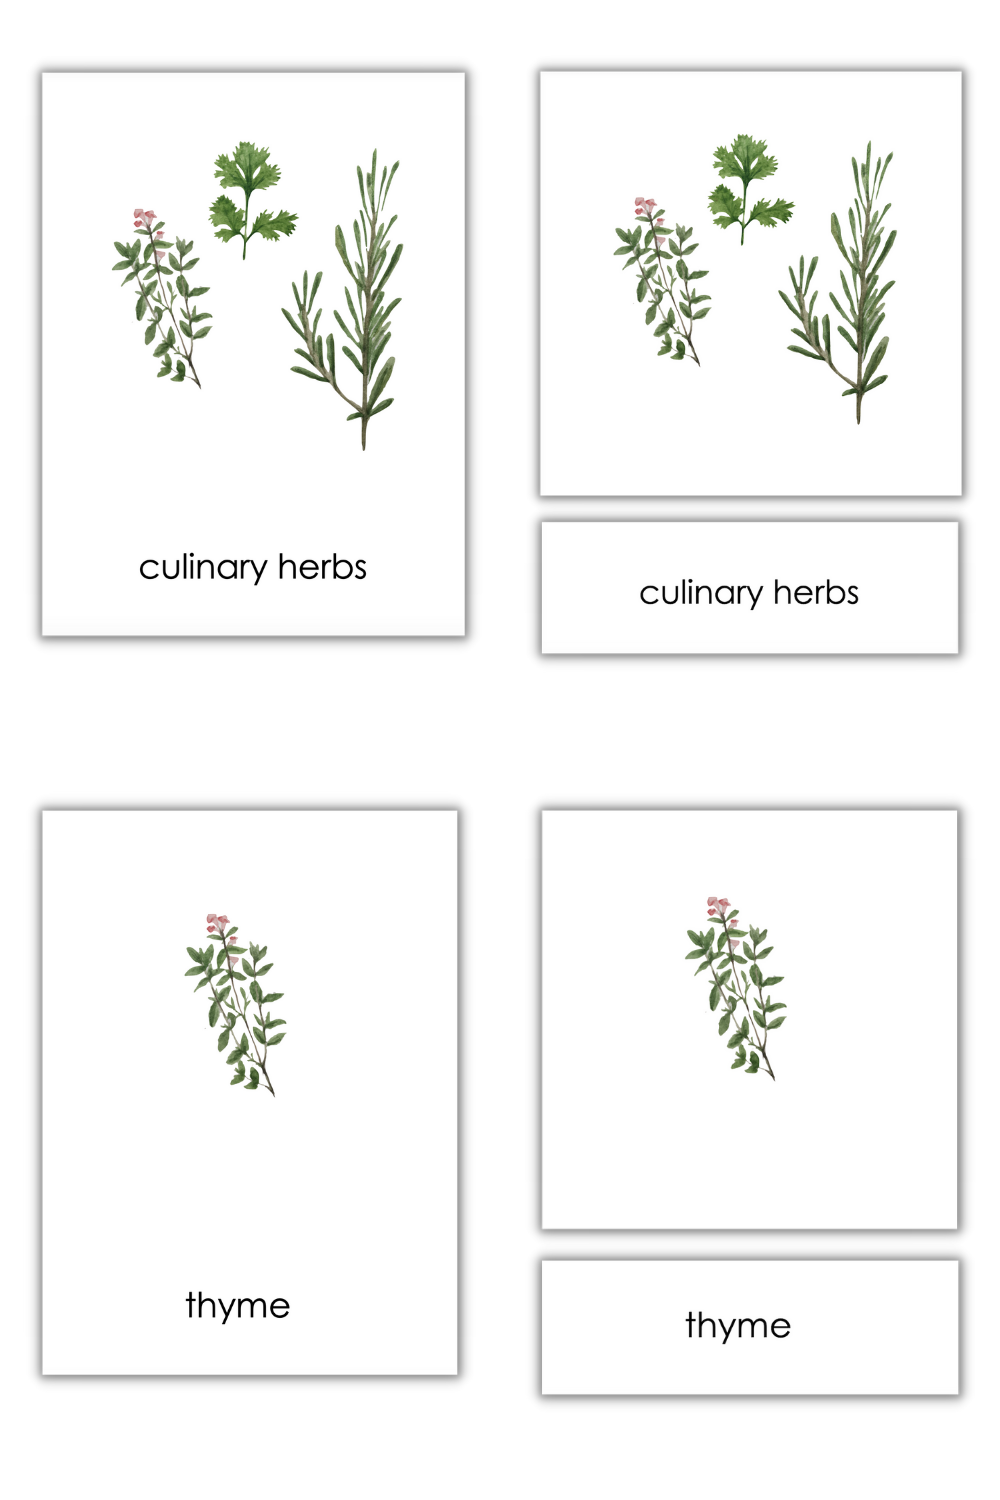 Culinary Herbs - Daily Life Classified Cards